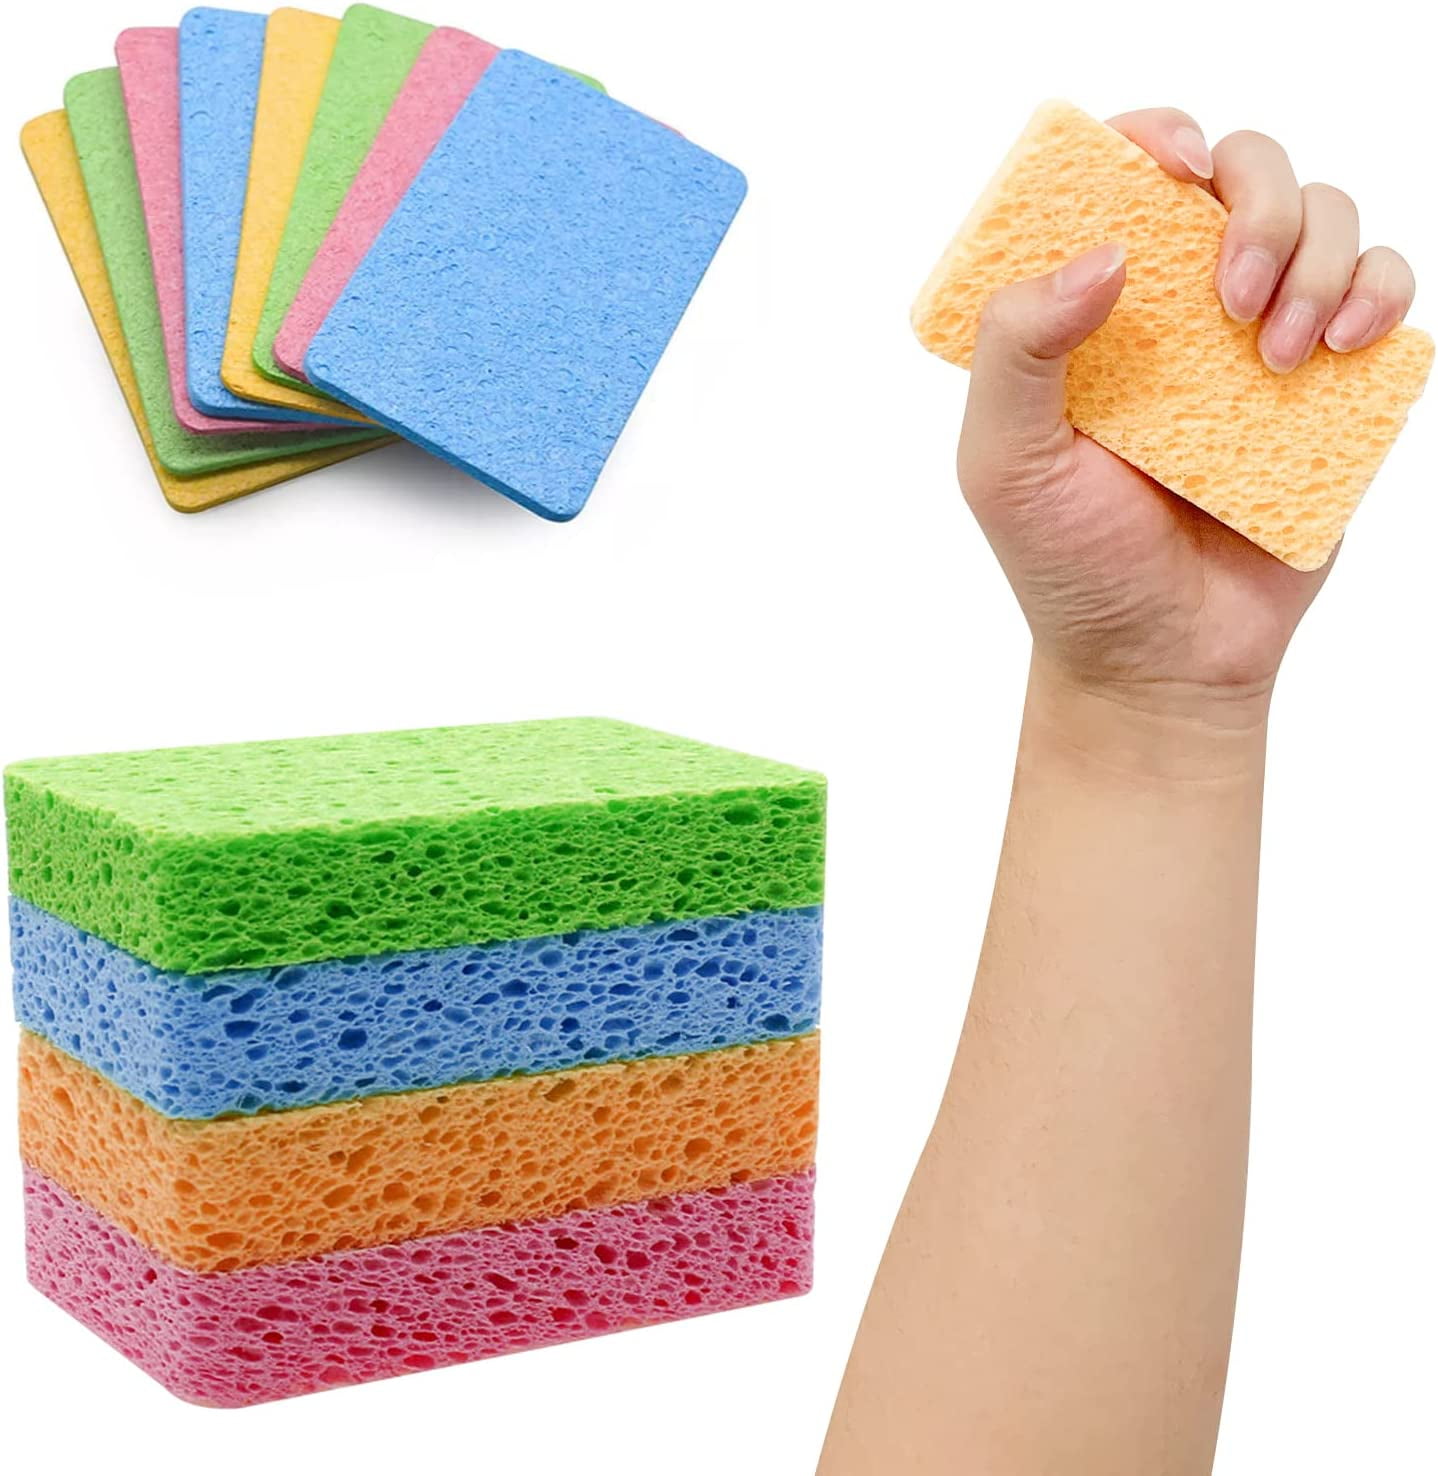 EzzDoo Christmas Sponges Kitchen - 4 Packs of Dish Sponges for Washing  Dishes - Compressed Cellulose Natural Scrub Sponges Good for Dish Cleaning  